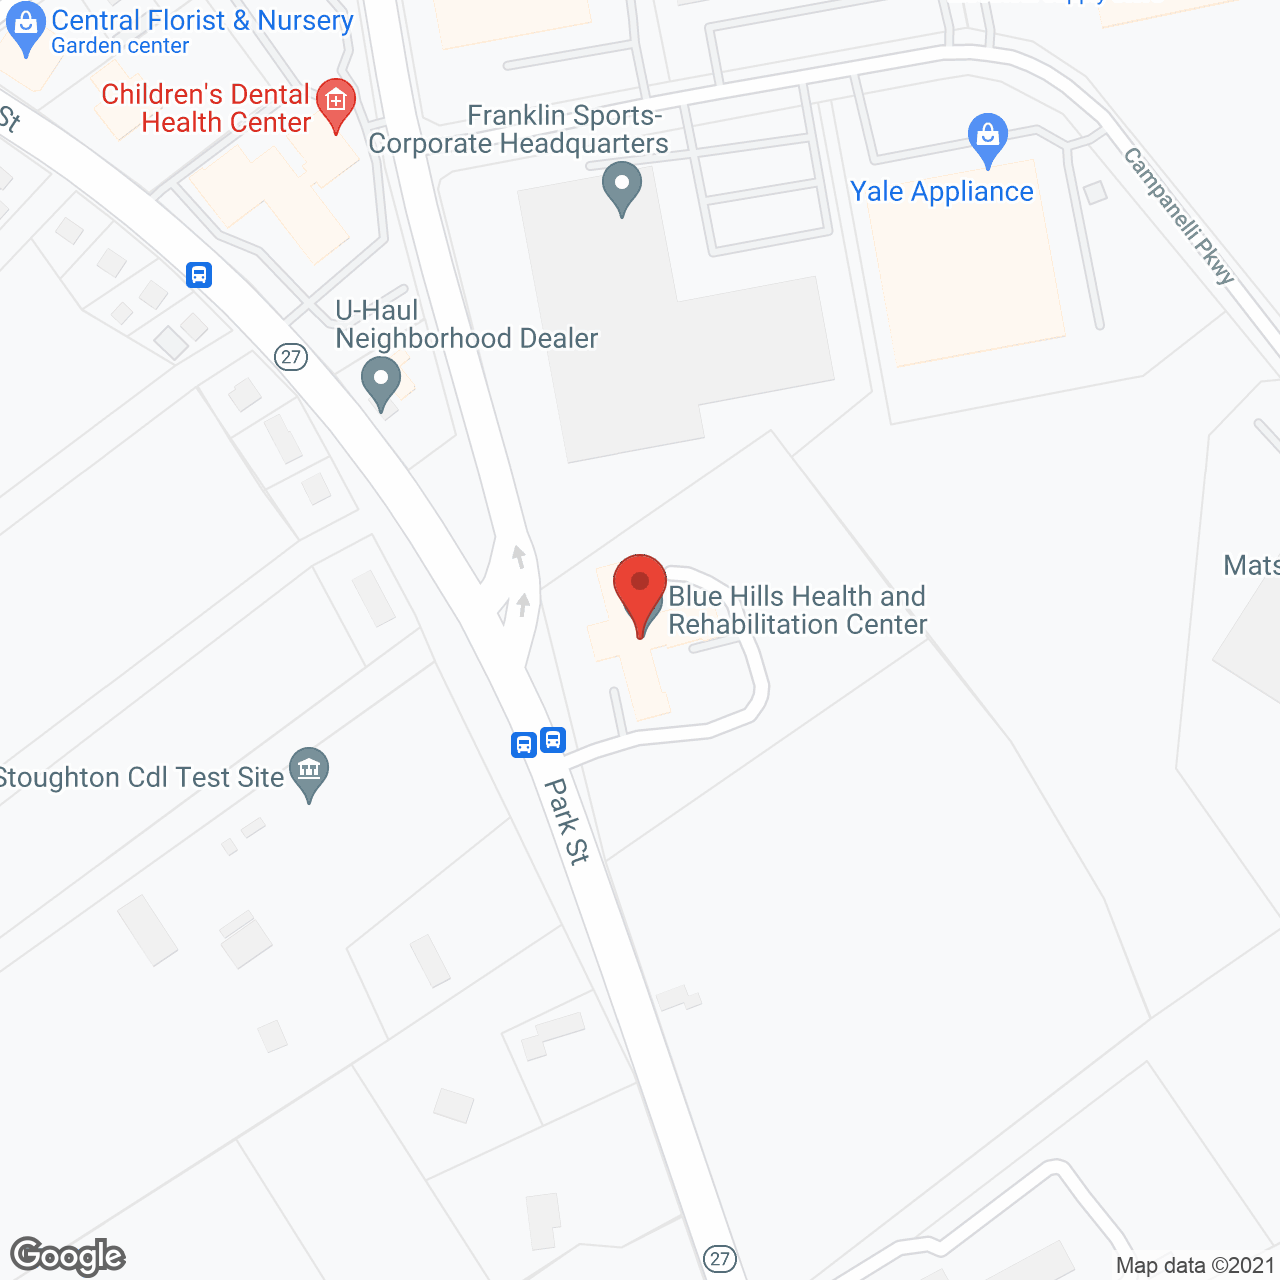 Blue Hills Health and Rehabilitation Center in google map